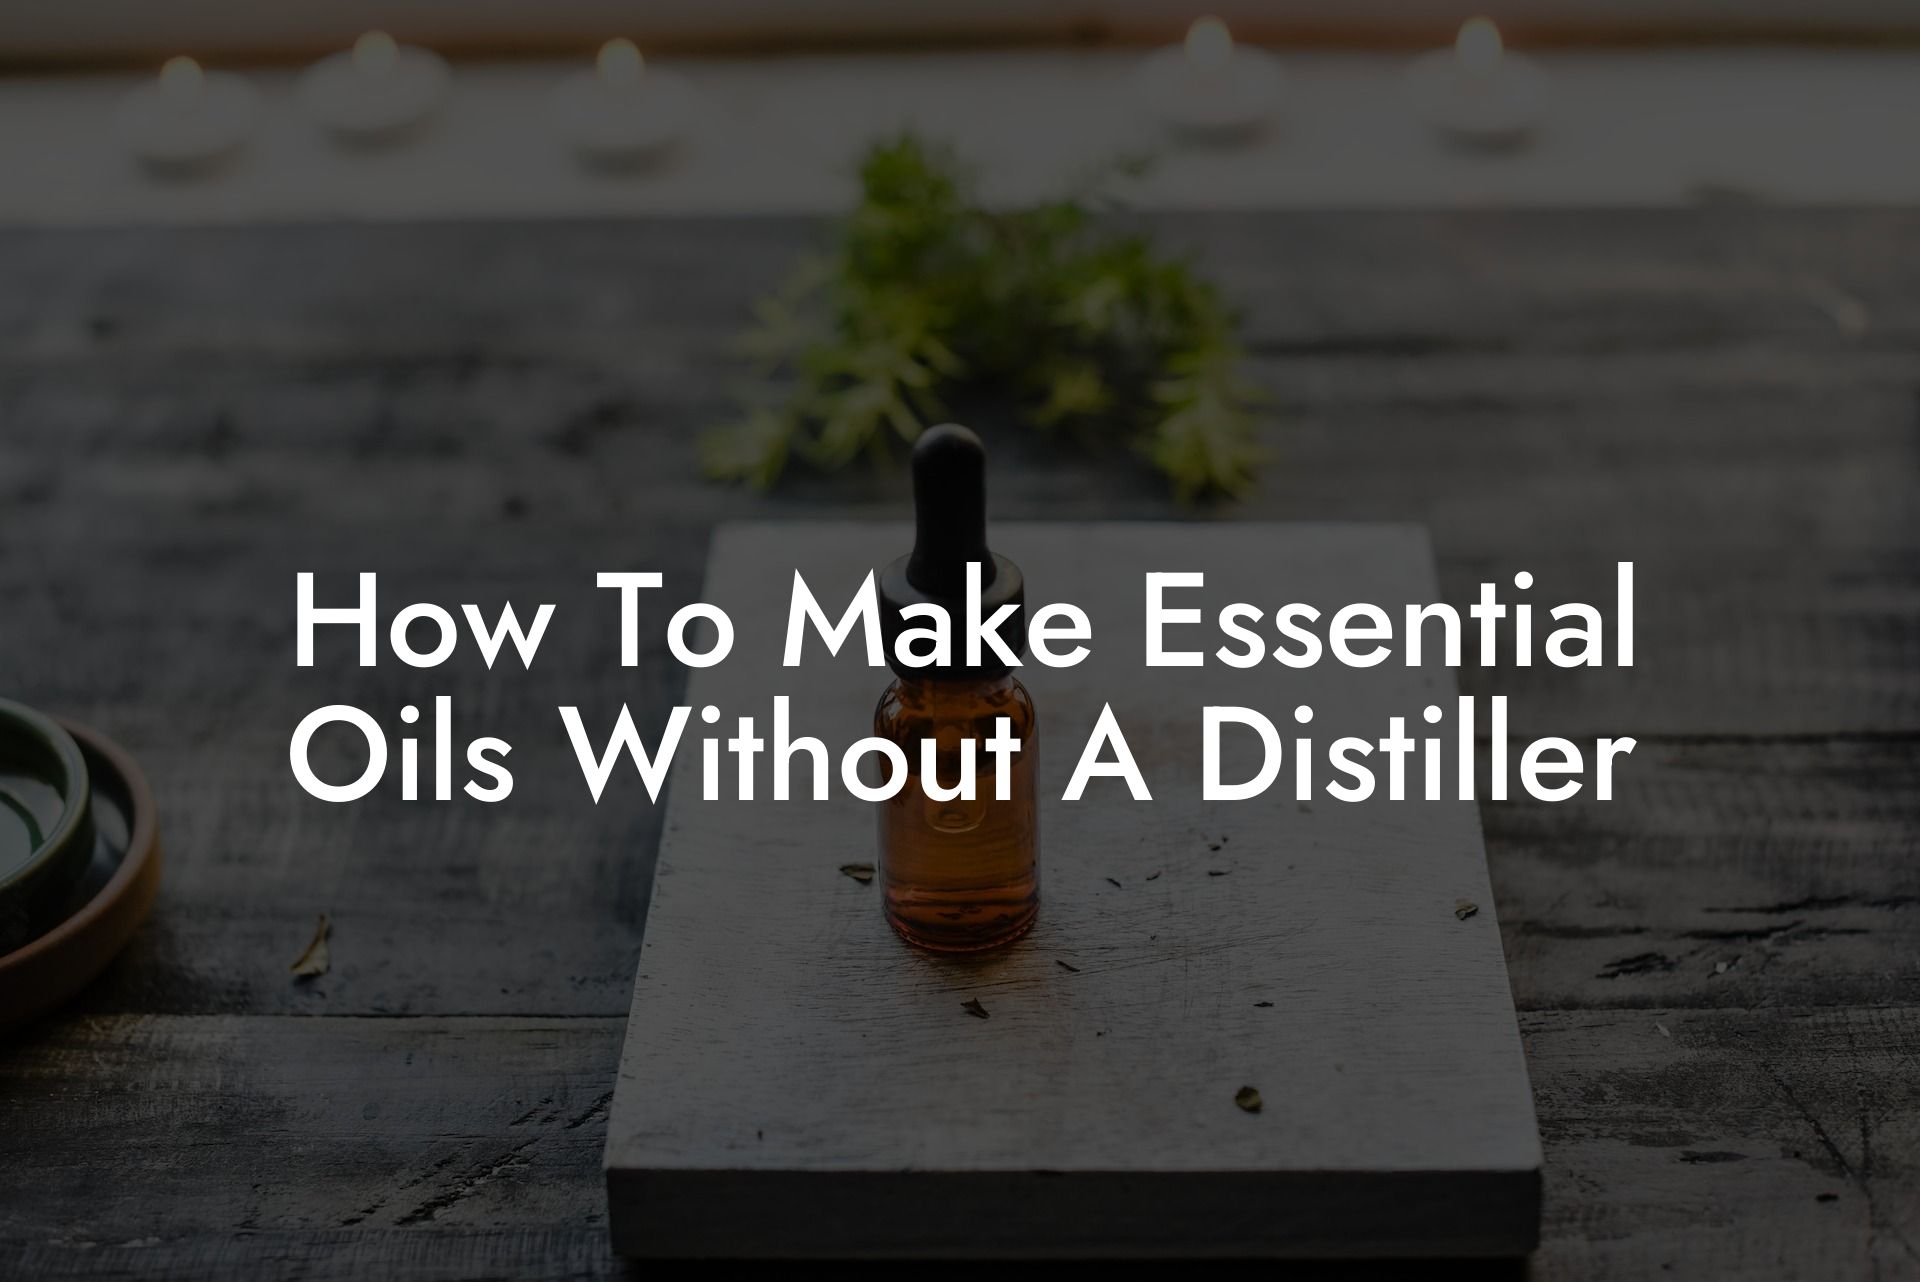 How To Make Essential Oils Without A Distiller